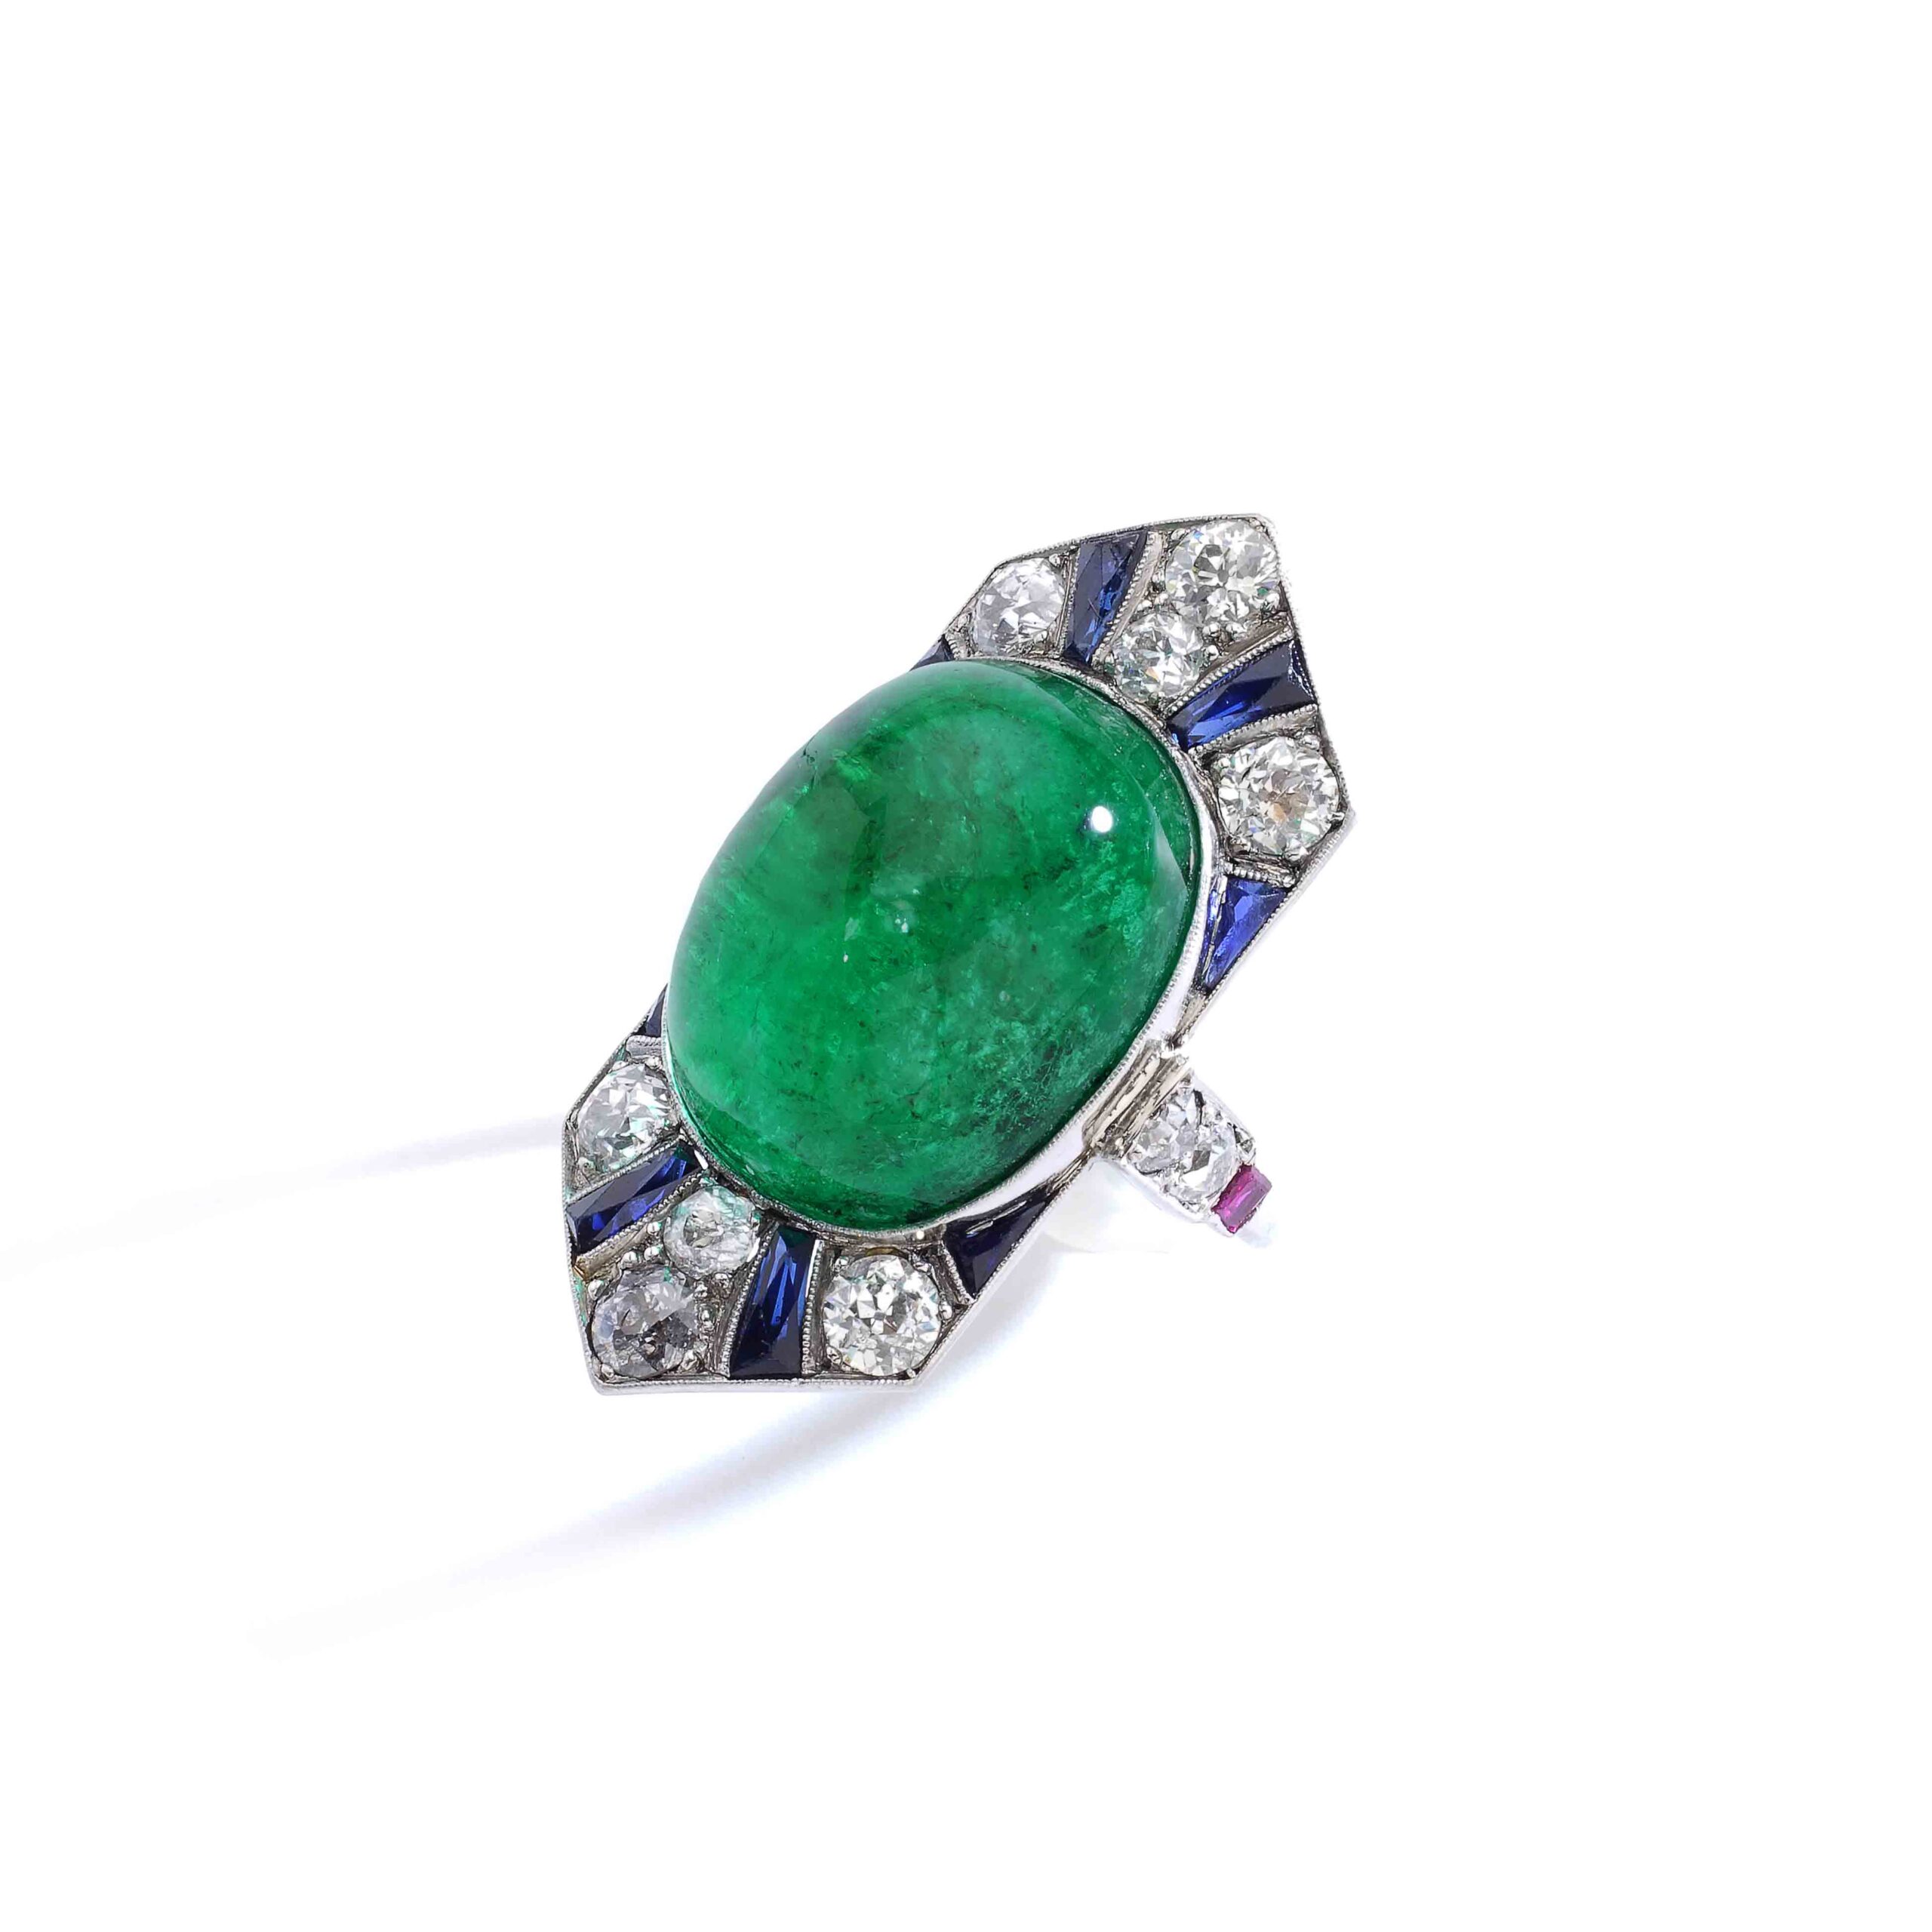 Henri Picq, Art Deco ring in sapphires, rubies, and old-cut diamonds on platinum centered with a significant Colombian emerald of approximately 30.00 carats in cabochon cut. French workmanship. Circa 1925. Master jeweler hallmark of Henri Picq, who was one of the most important high jewelry workshops in Paris at the beginning of the 20th century, having created numerous pieces for the houses on Place Vendôme, primarily Cartier